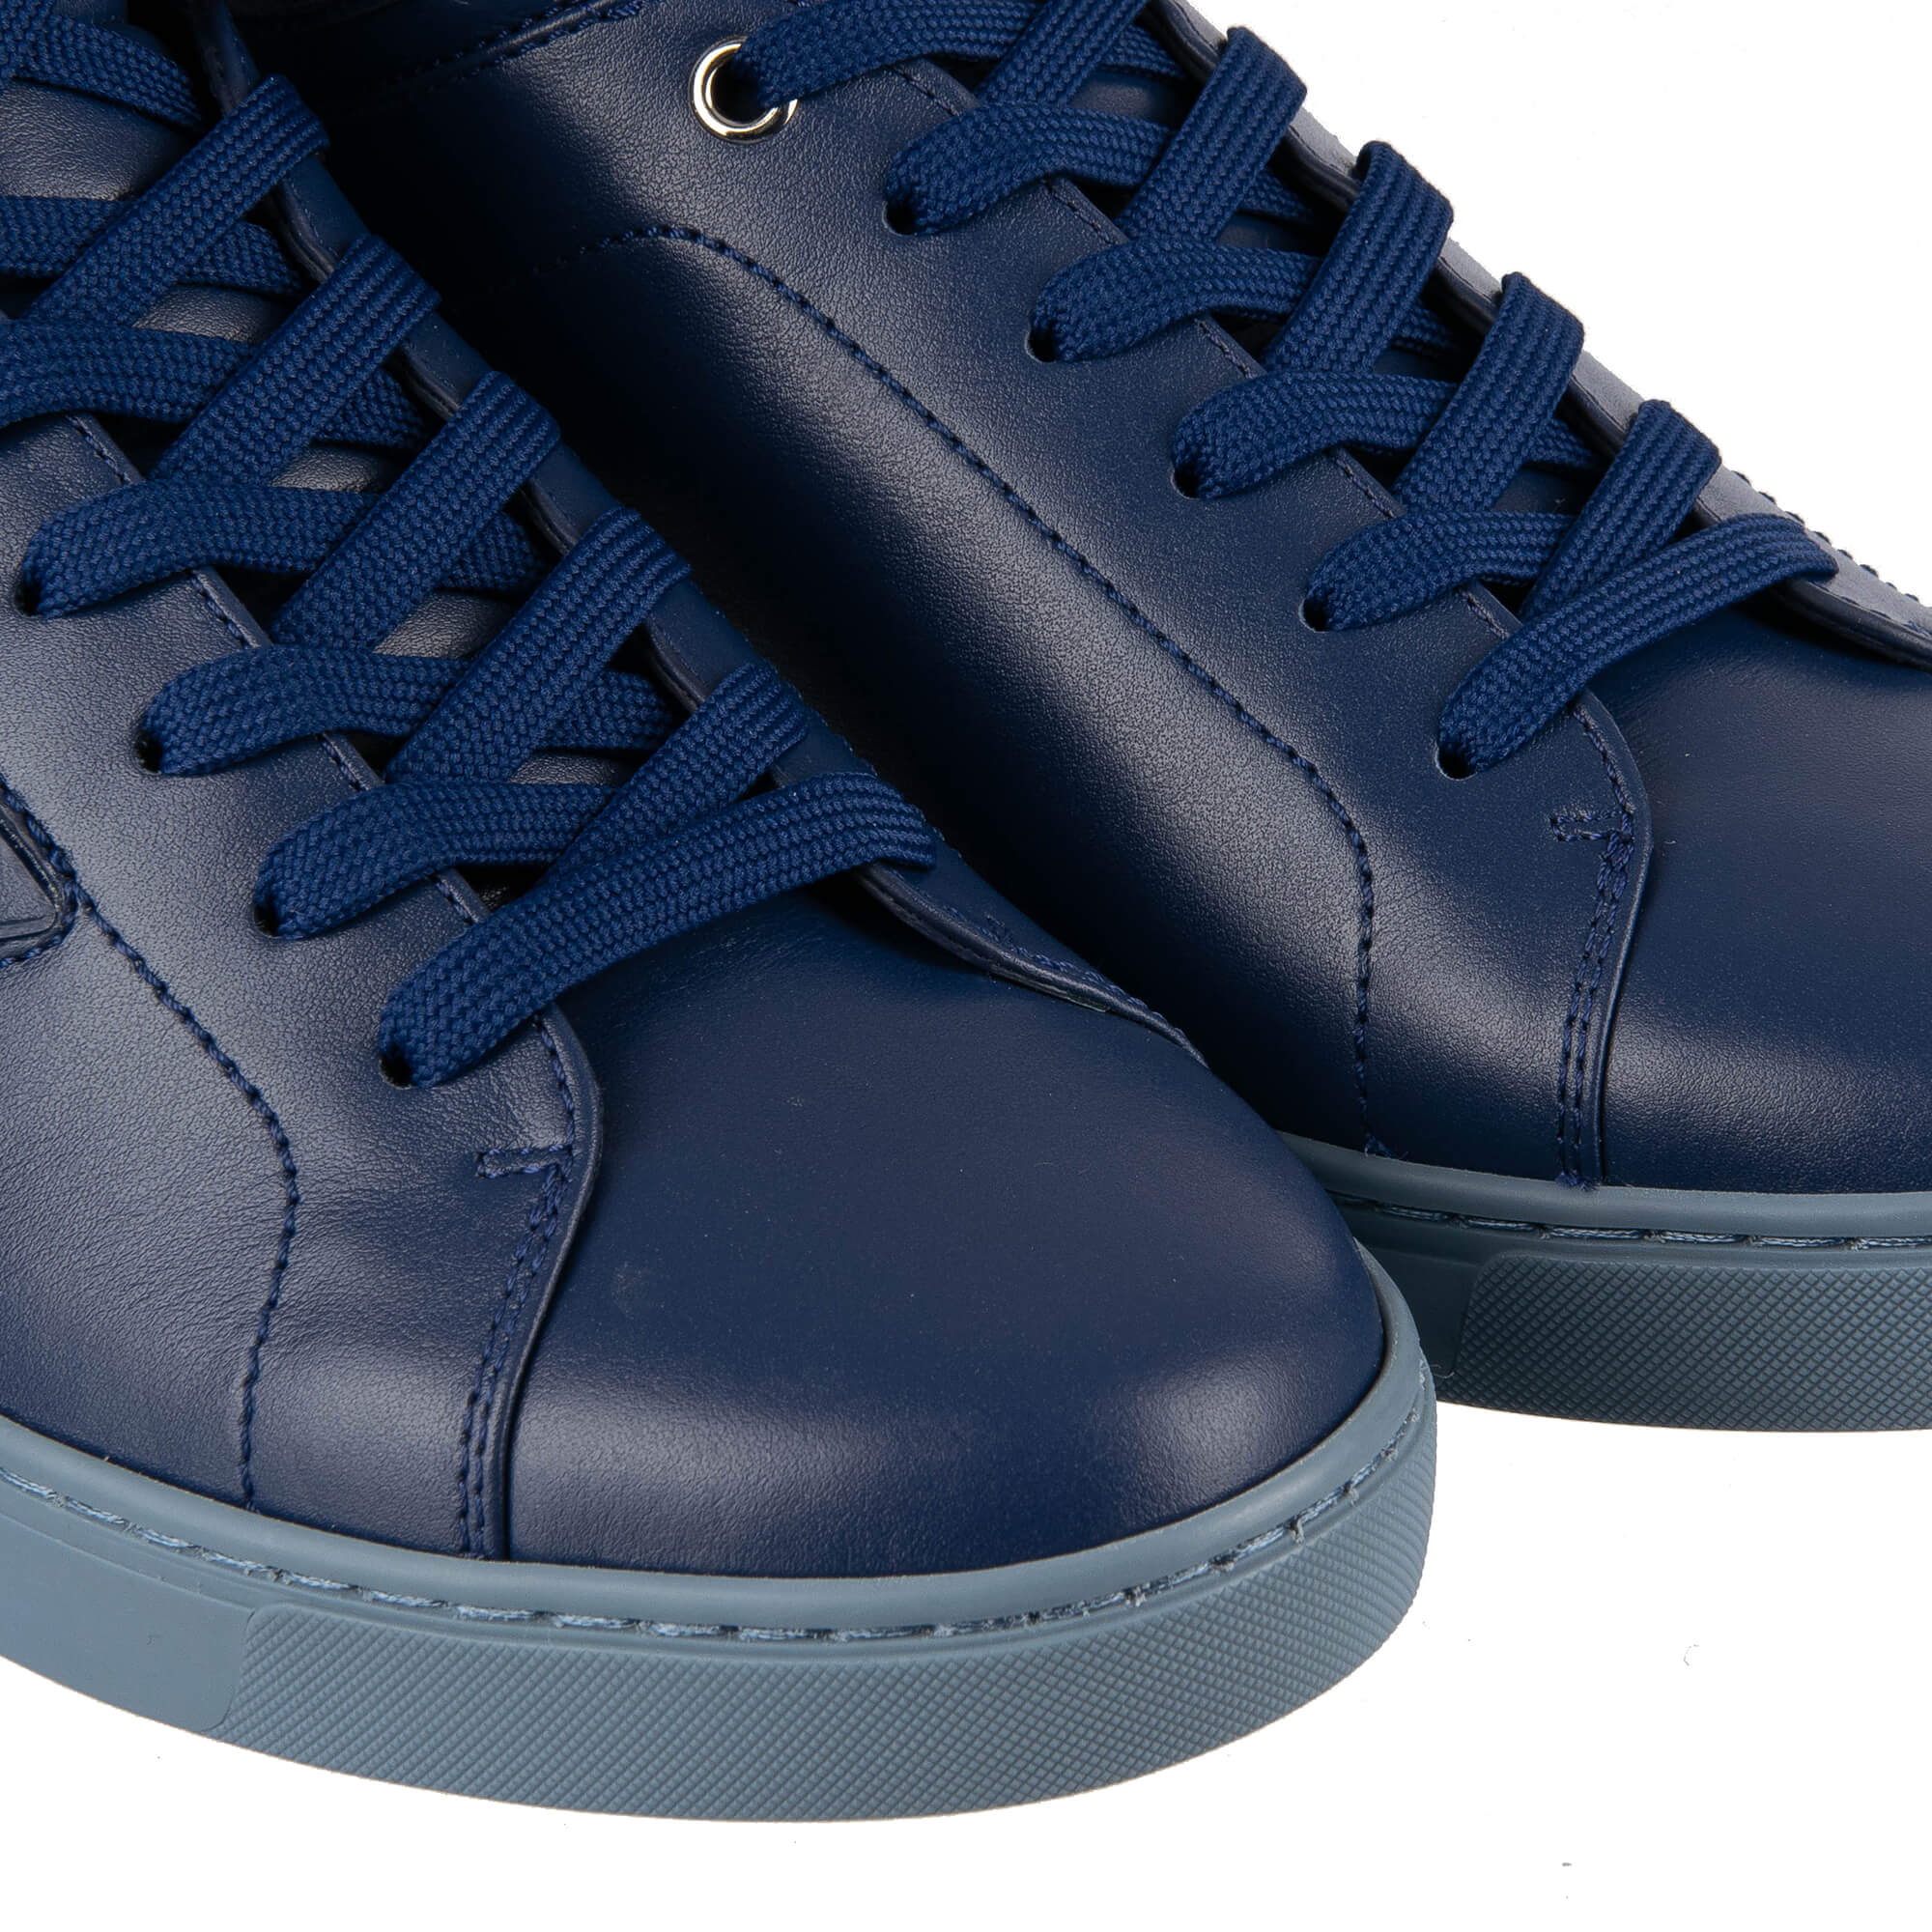 Dolce & Gabbana High-Top Leather Sneakers LONDON Blue | FASHION ROOMS